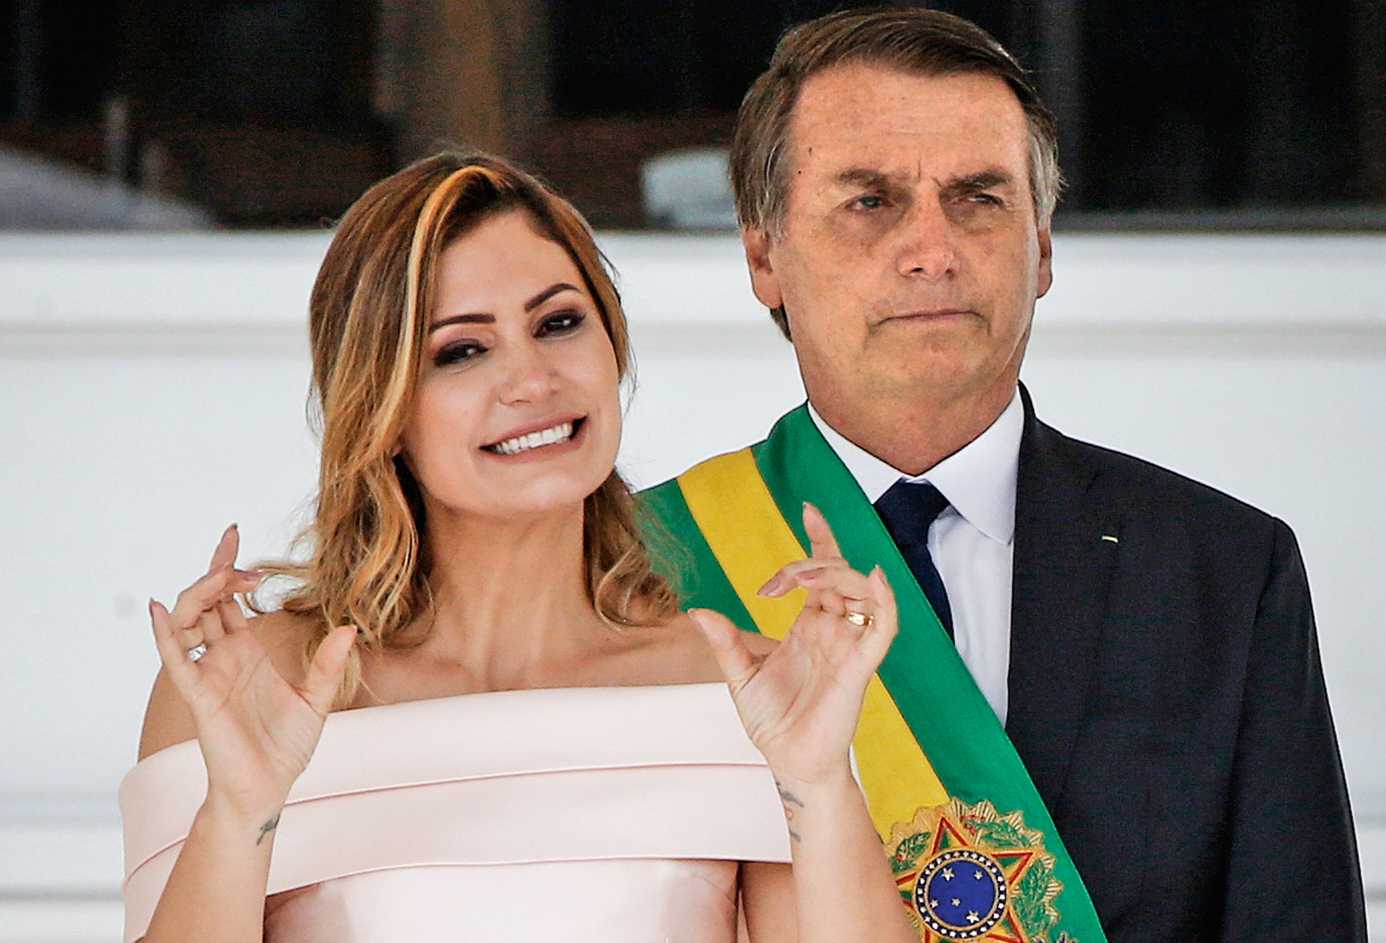 President Bolsonaro and first lady Michelle during a political function